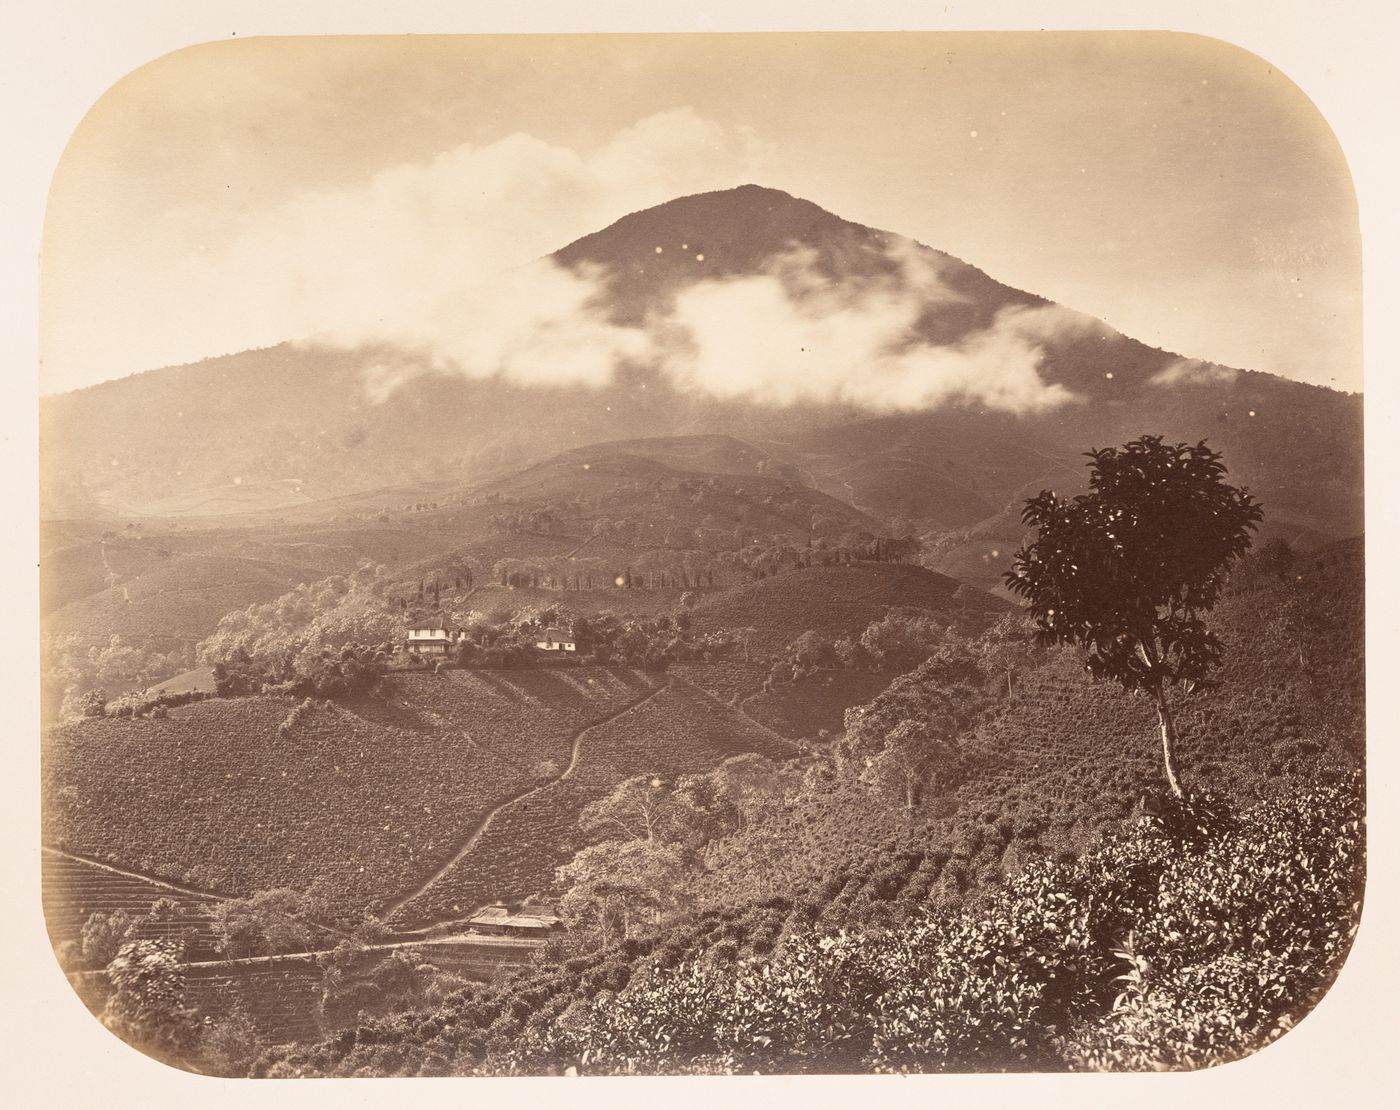 View of a volcano and a tea plantation showing houses and a tree, the Preanger Regencies (now in Jawa Barat), Dutch East Indies (now Indonesia)